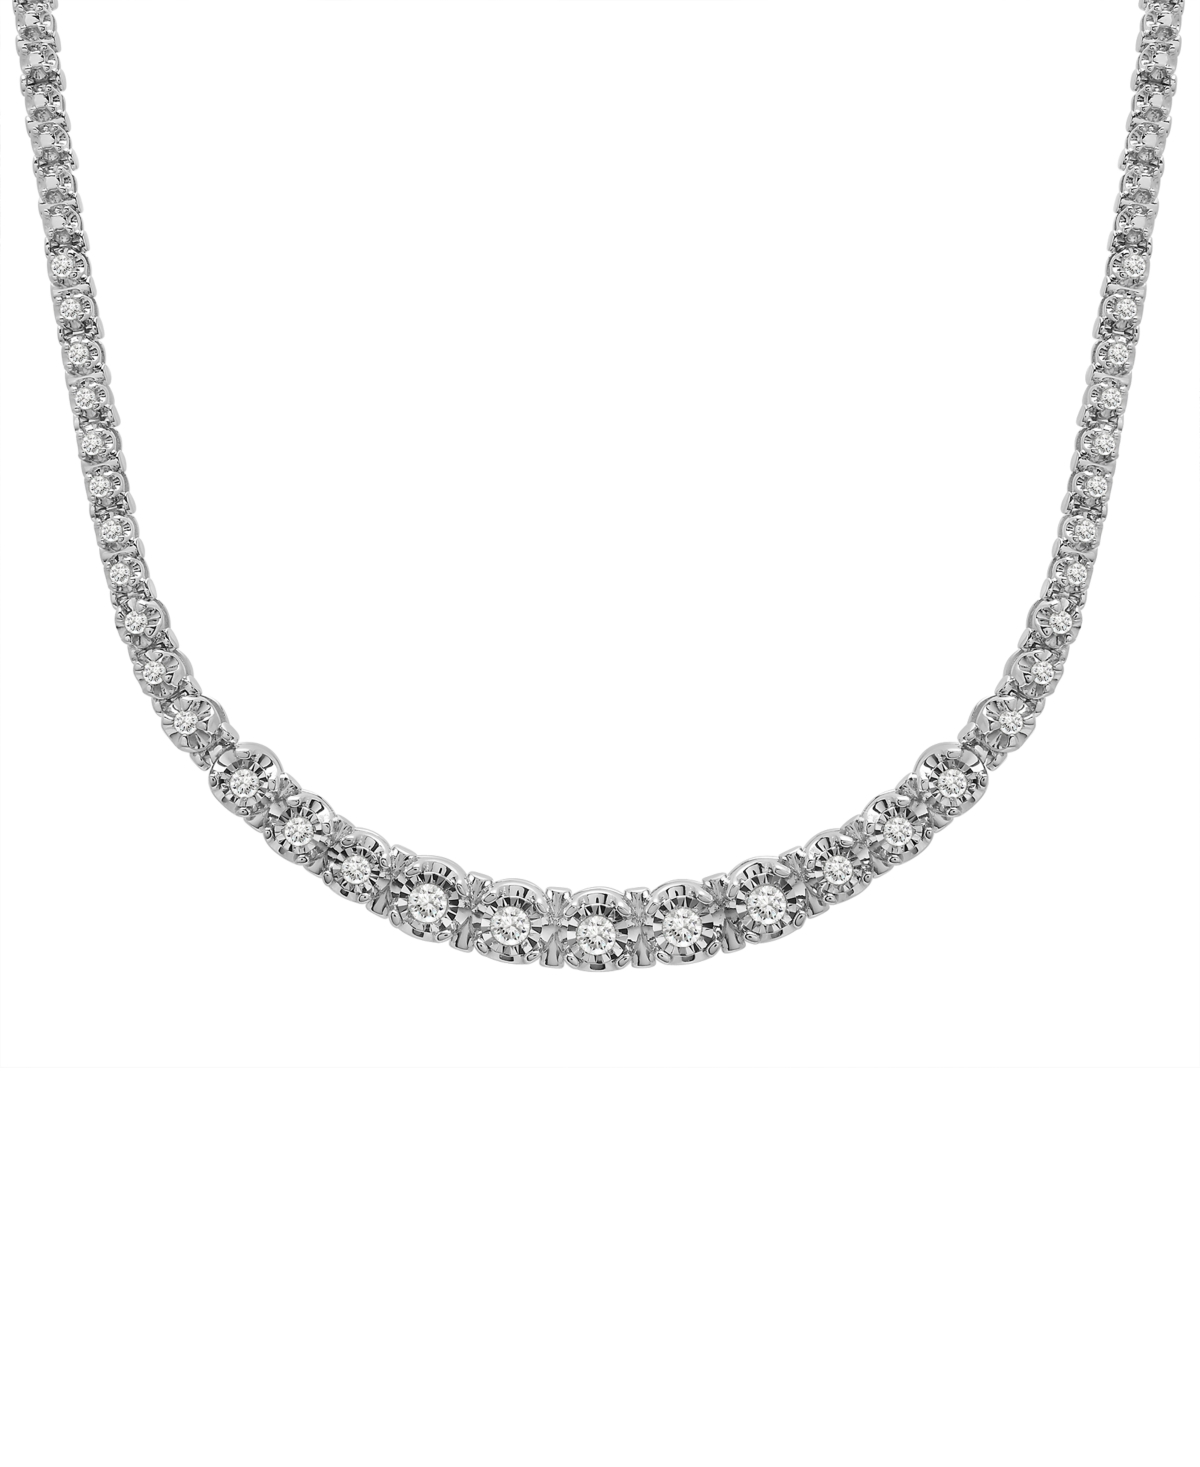 Diamond Graduated 17" Collar Necklace (1 ct. t.w.) in Sterling Silver, Created for Macy's - Sterling Silver